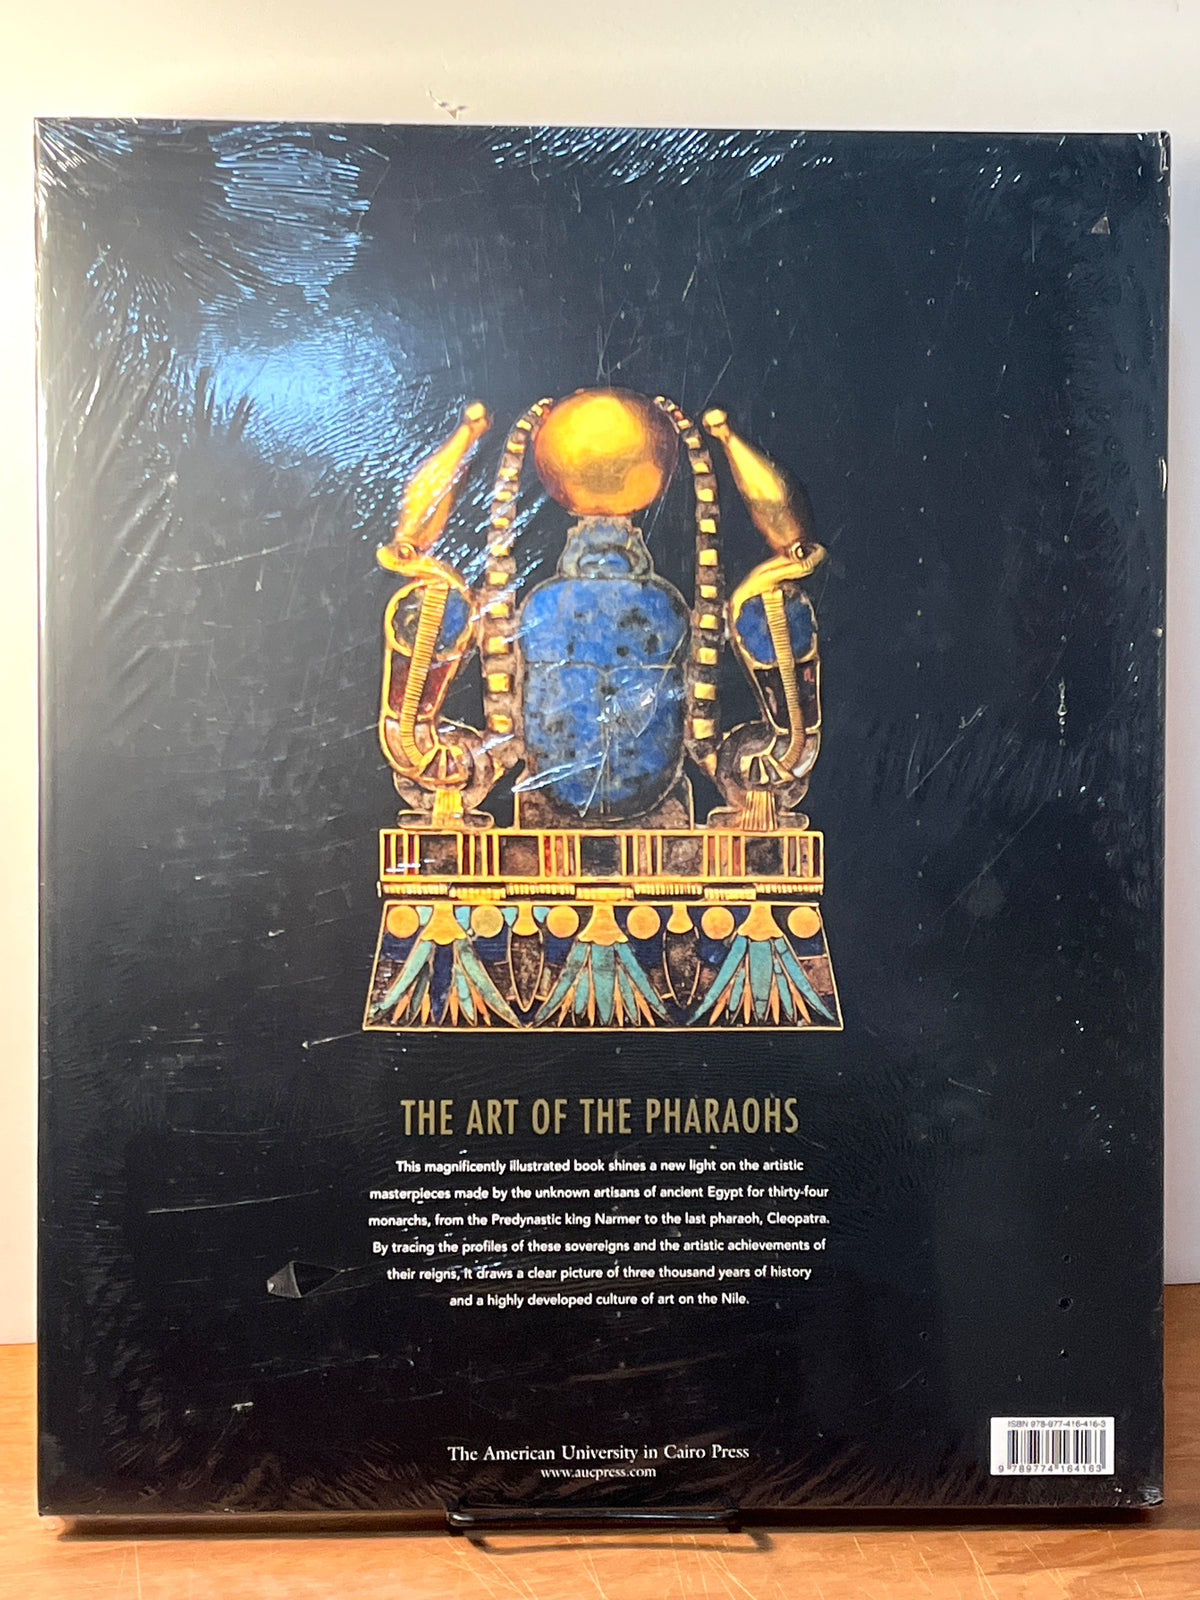 The Art of the Pharaohs, The American University in Cairo Press, 2010, HC, New in Shrink Wrap.